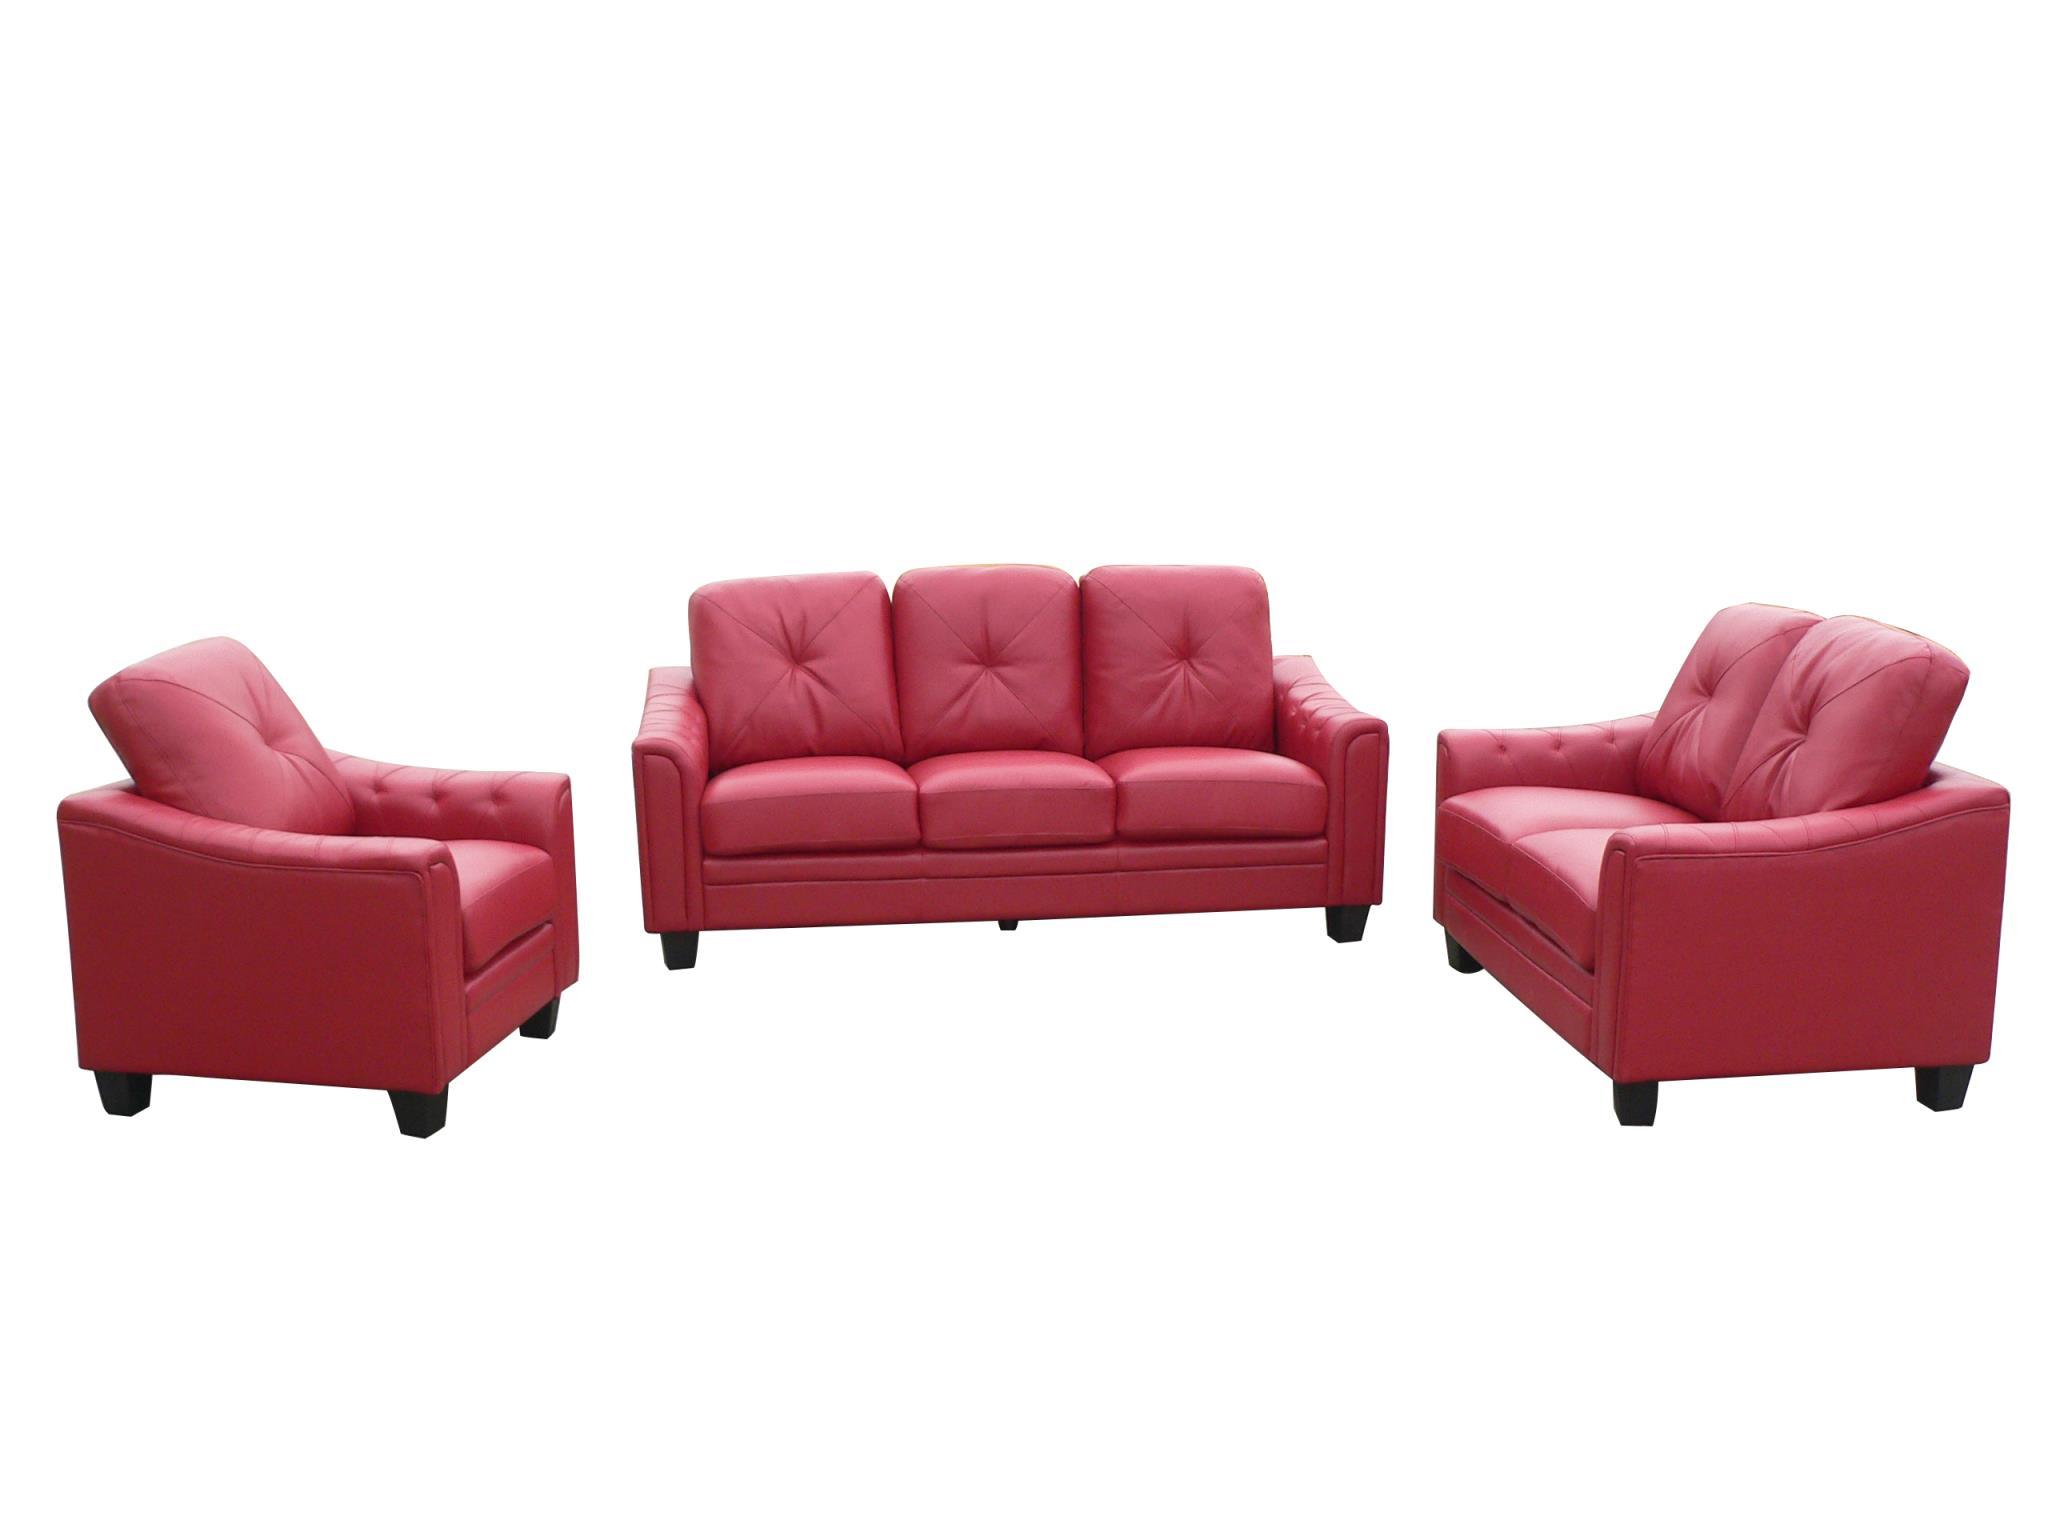 

    
MYCO Furniture Walden Red Bonded Leather Living Room Sofa Set 3Pcs Contemporary
